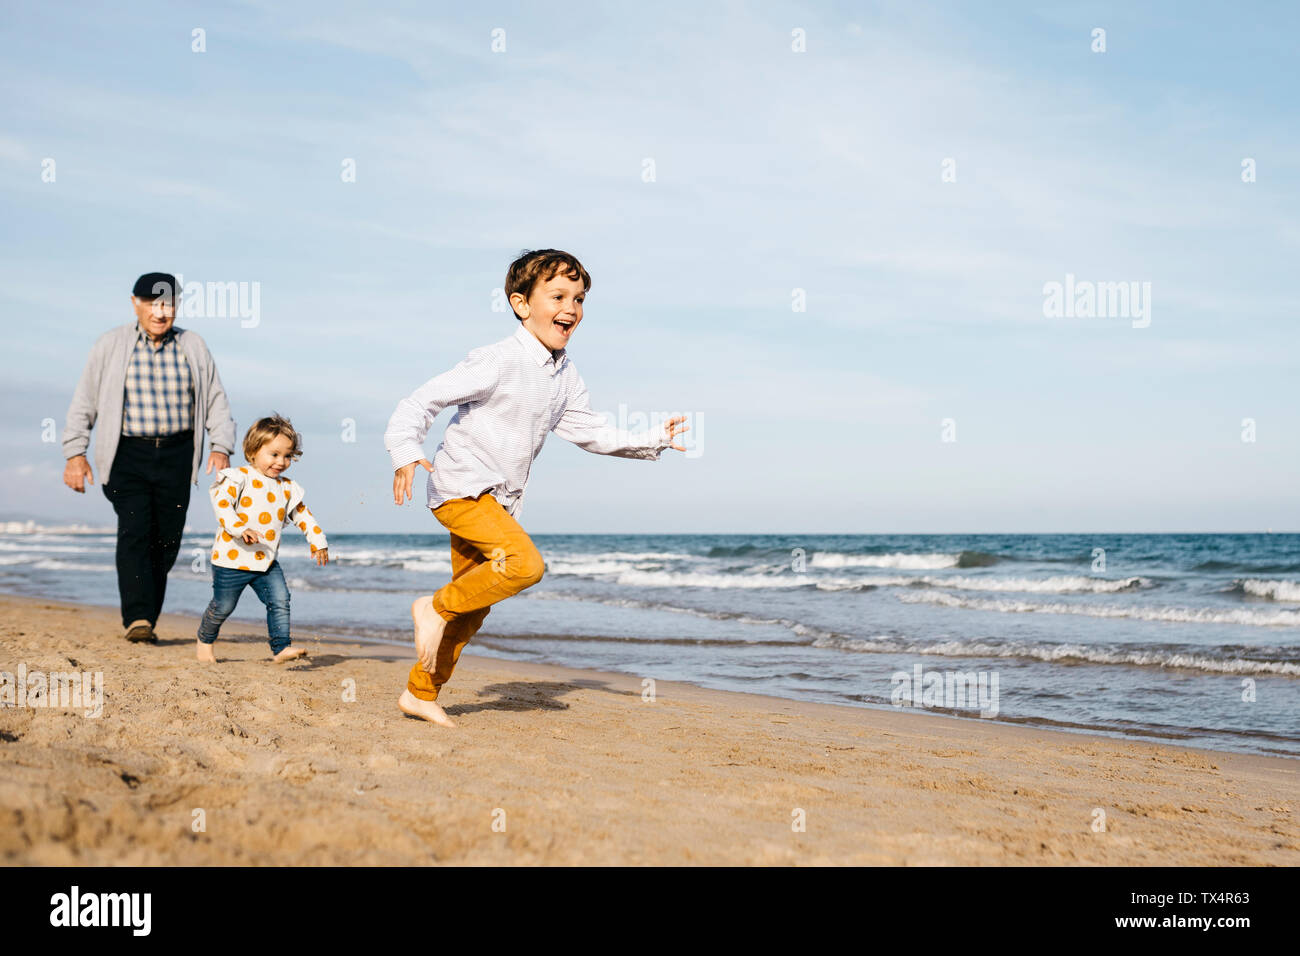 Grandfather strolling with his grandchildren on the beach Stock Photo